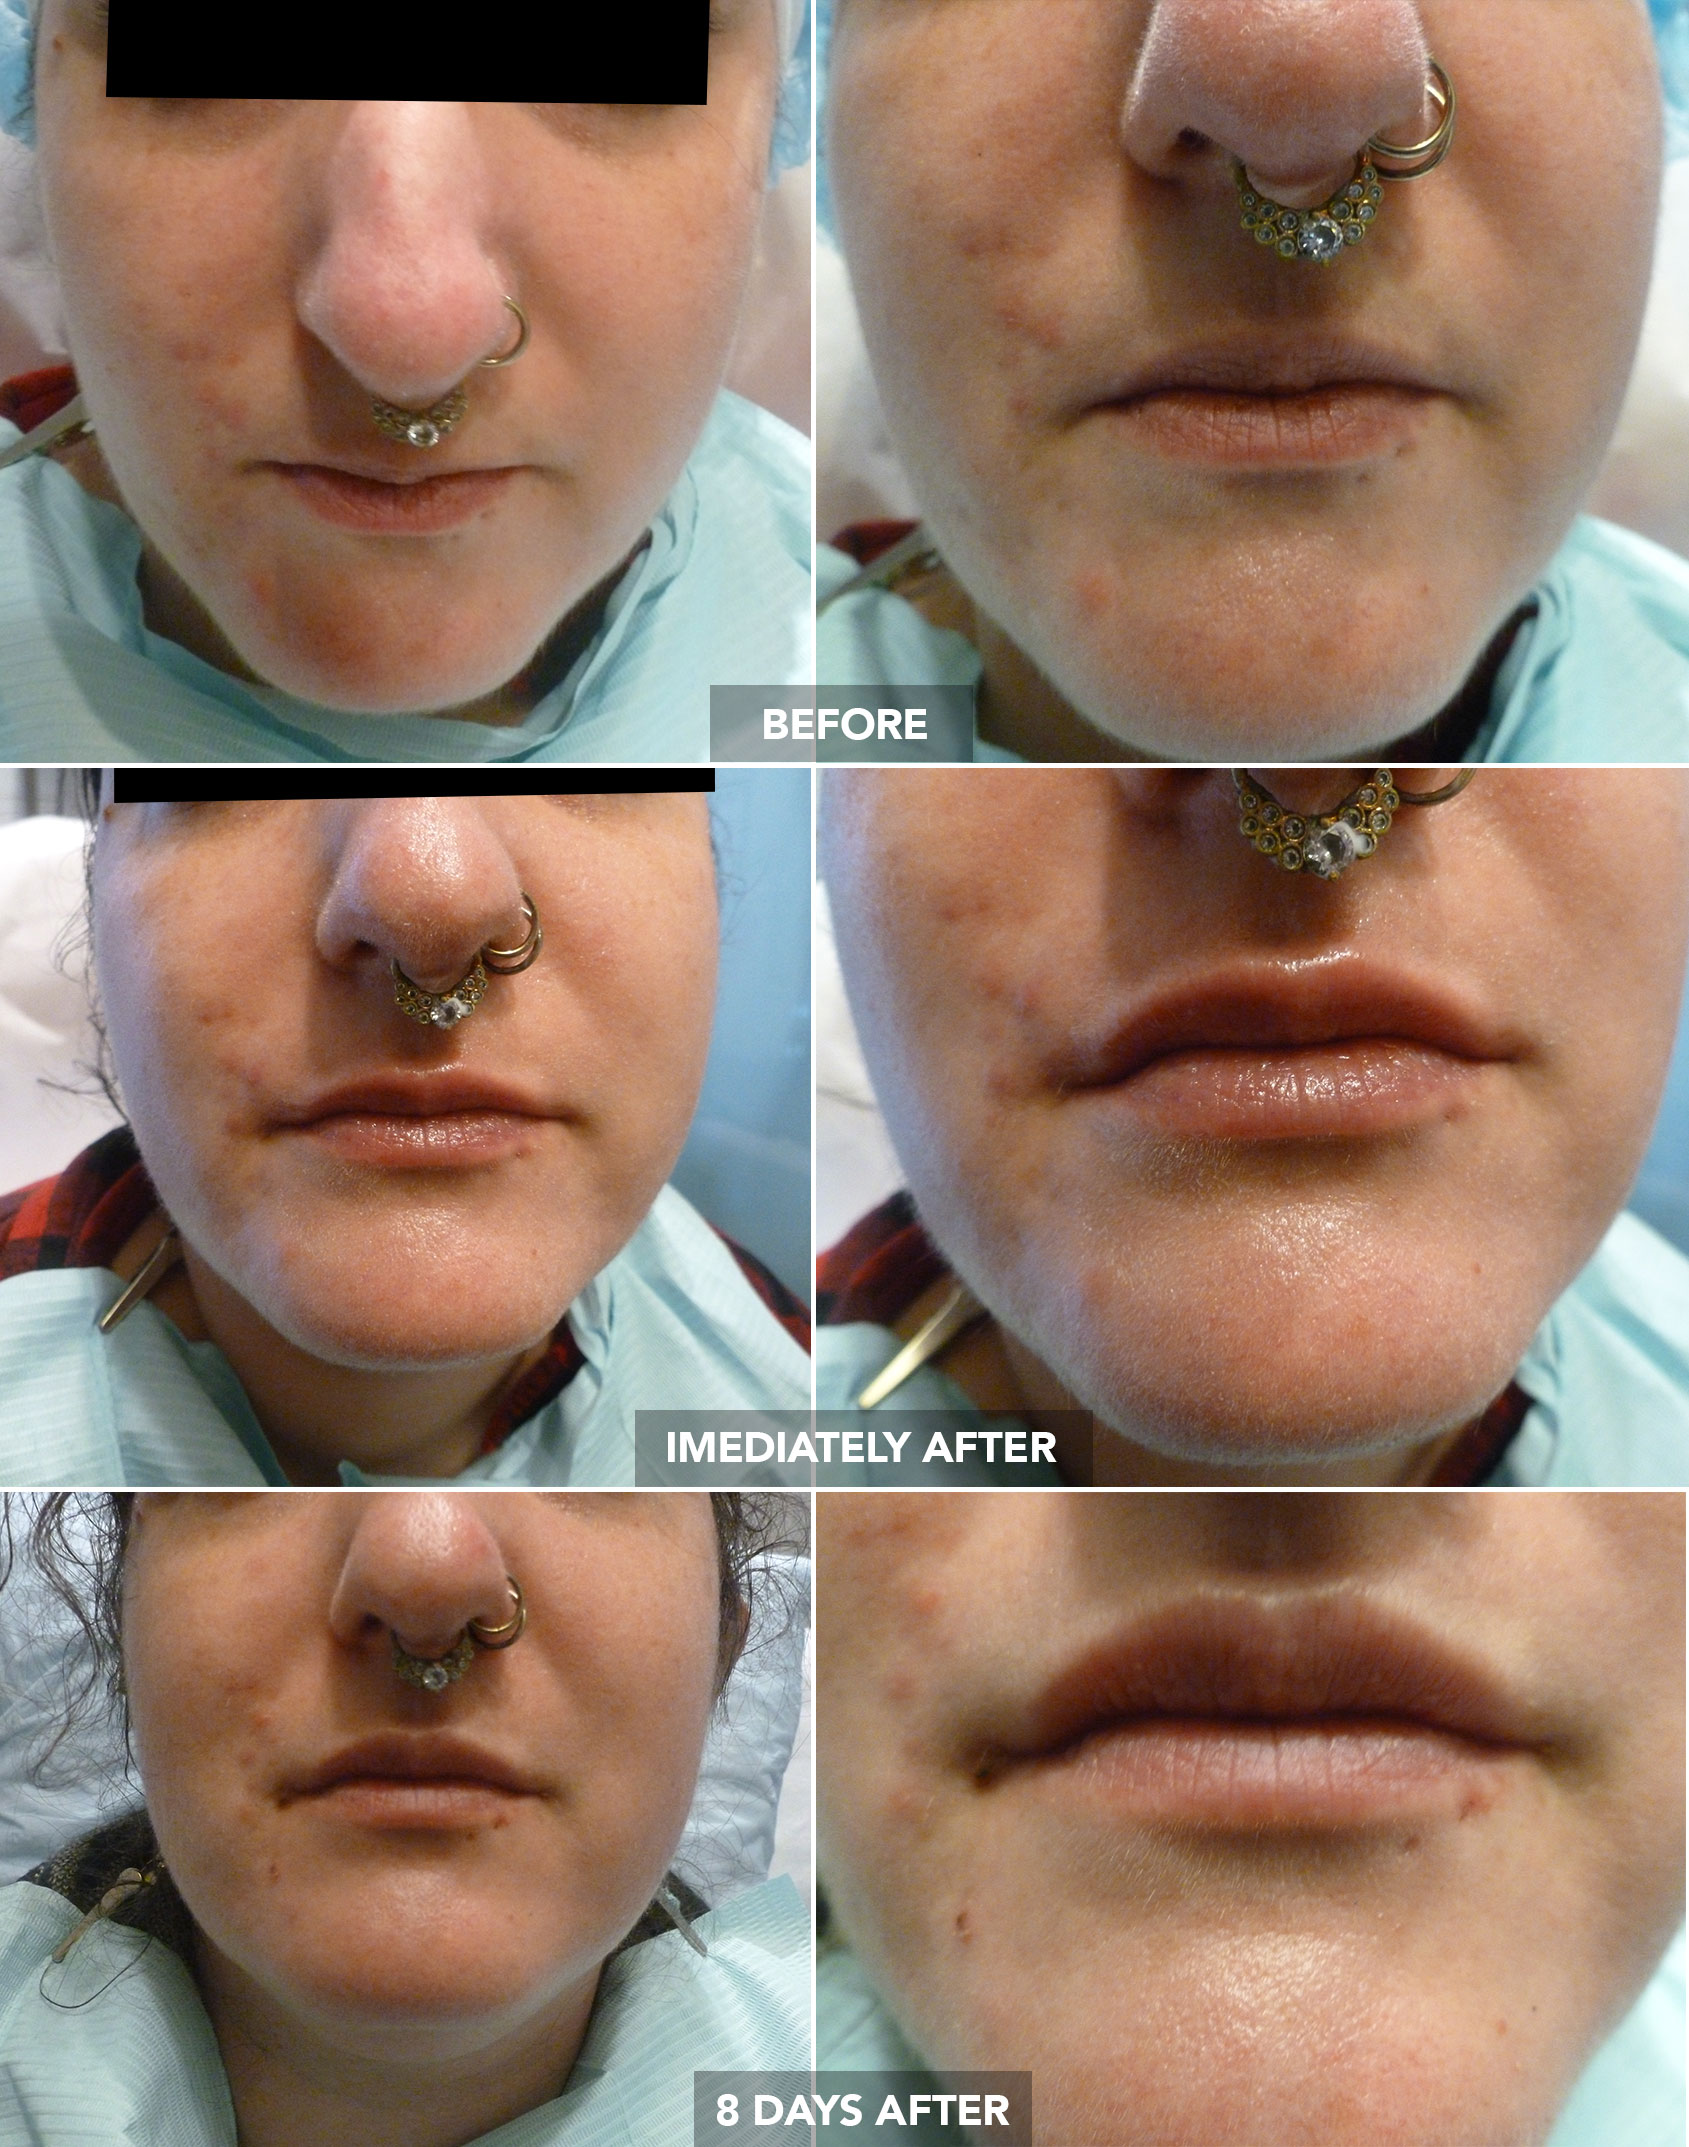 LIP AUGMENTATION – BEFORE / IMMEDIATELY AFTER / AFTER 8 DAYS